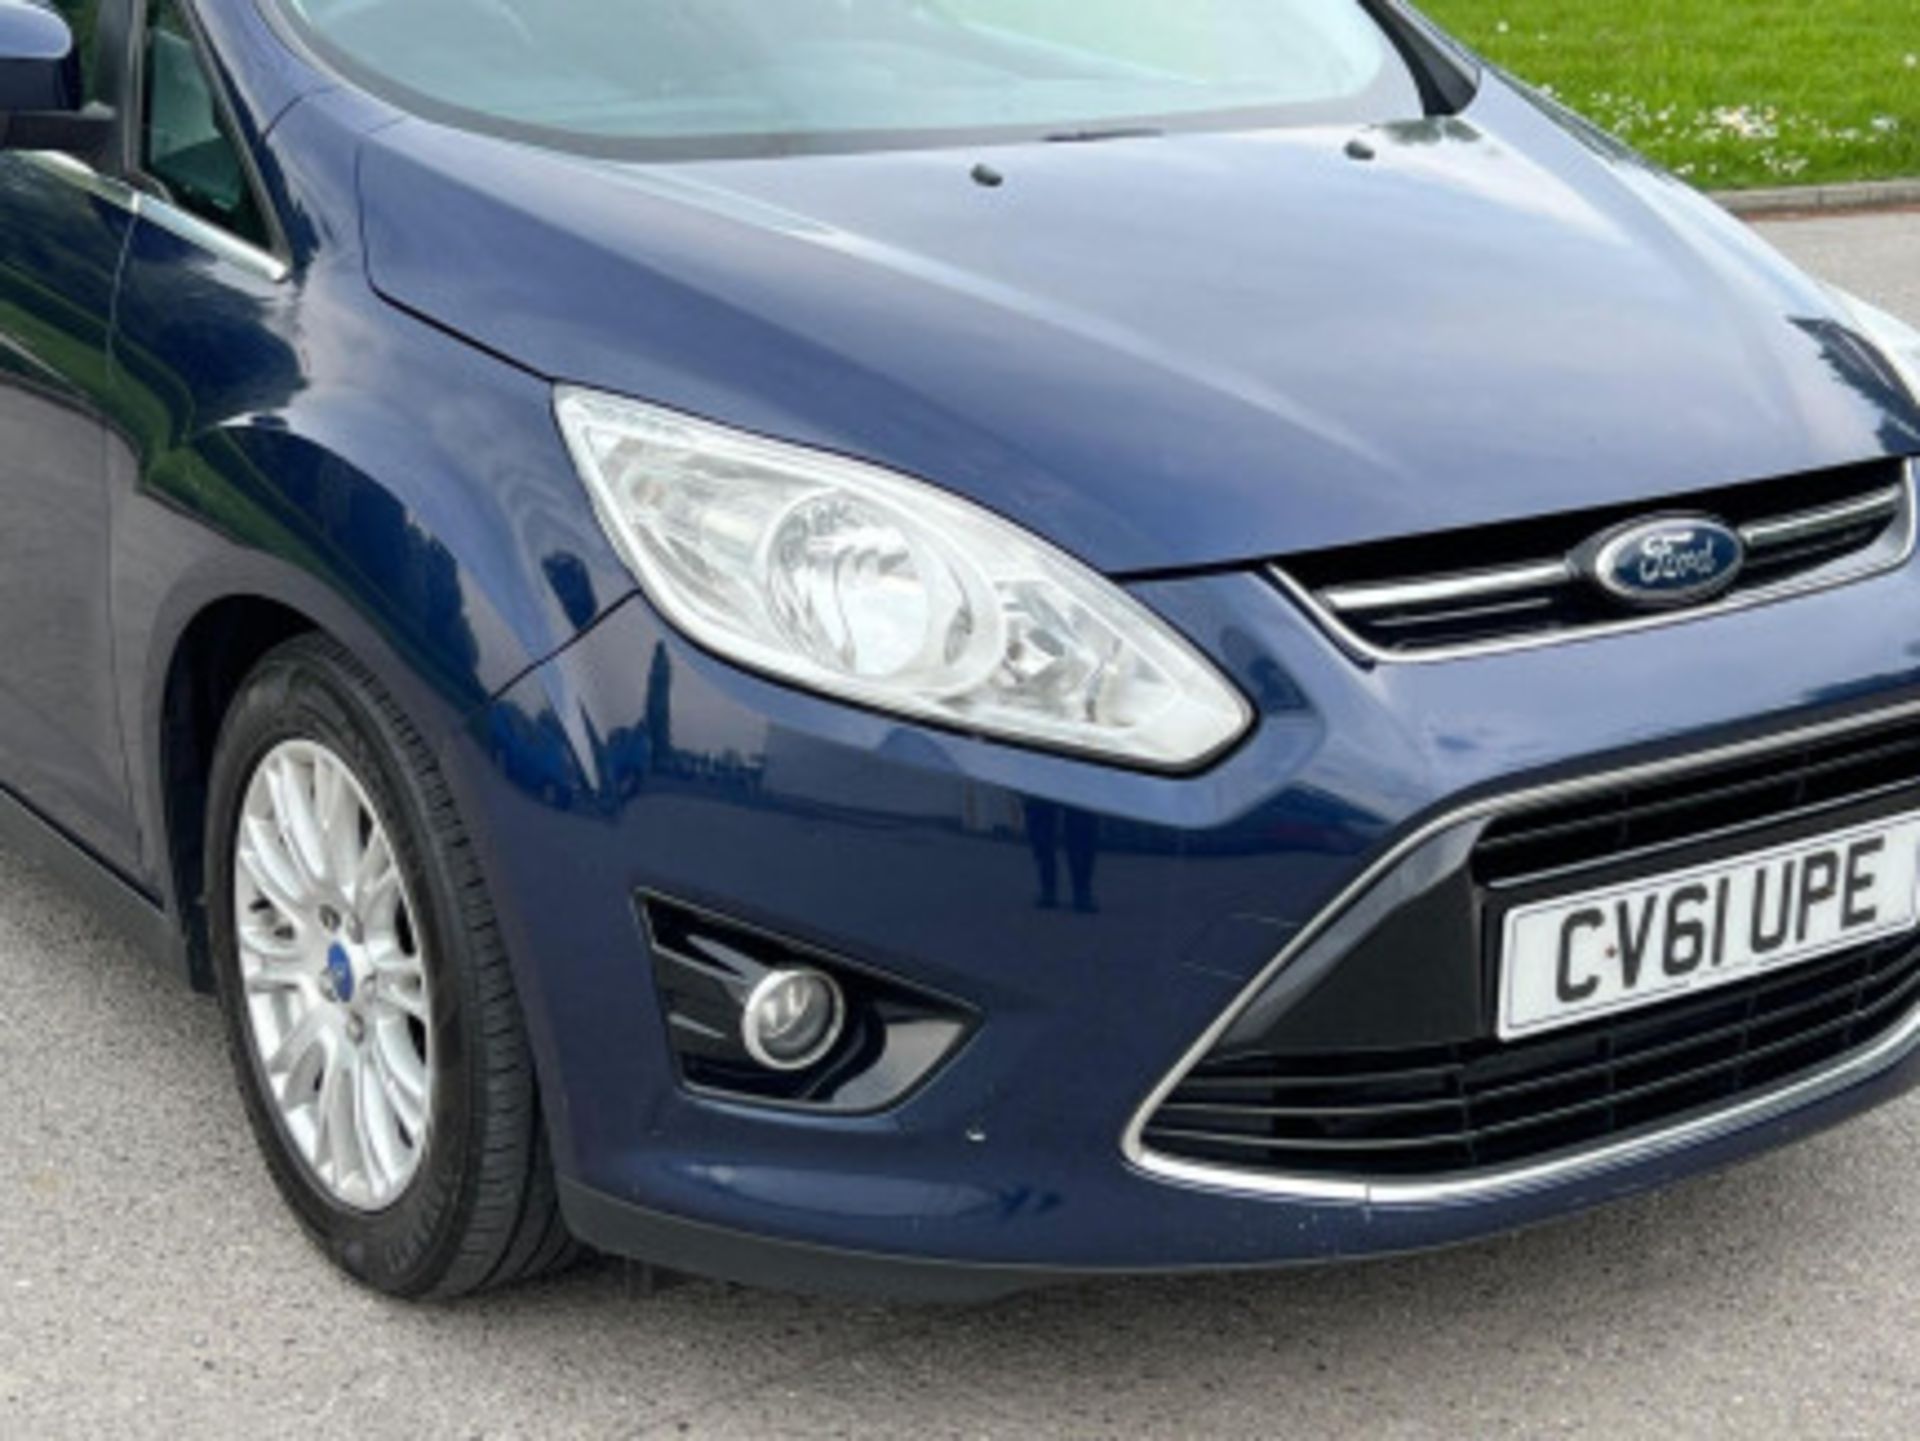 STYLISH AND SPACIOUS 2011 FORD GRAND C-MAX 1.6 TDCI >>--NO VAT ON HAMMER--<< - Image 55 of 136